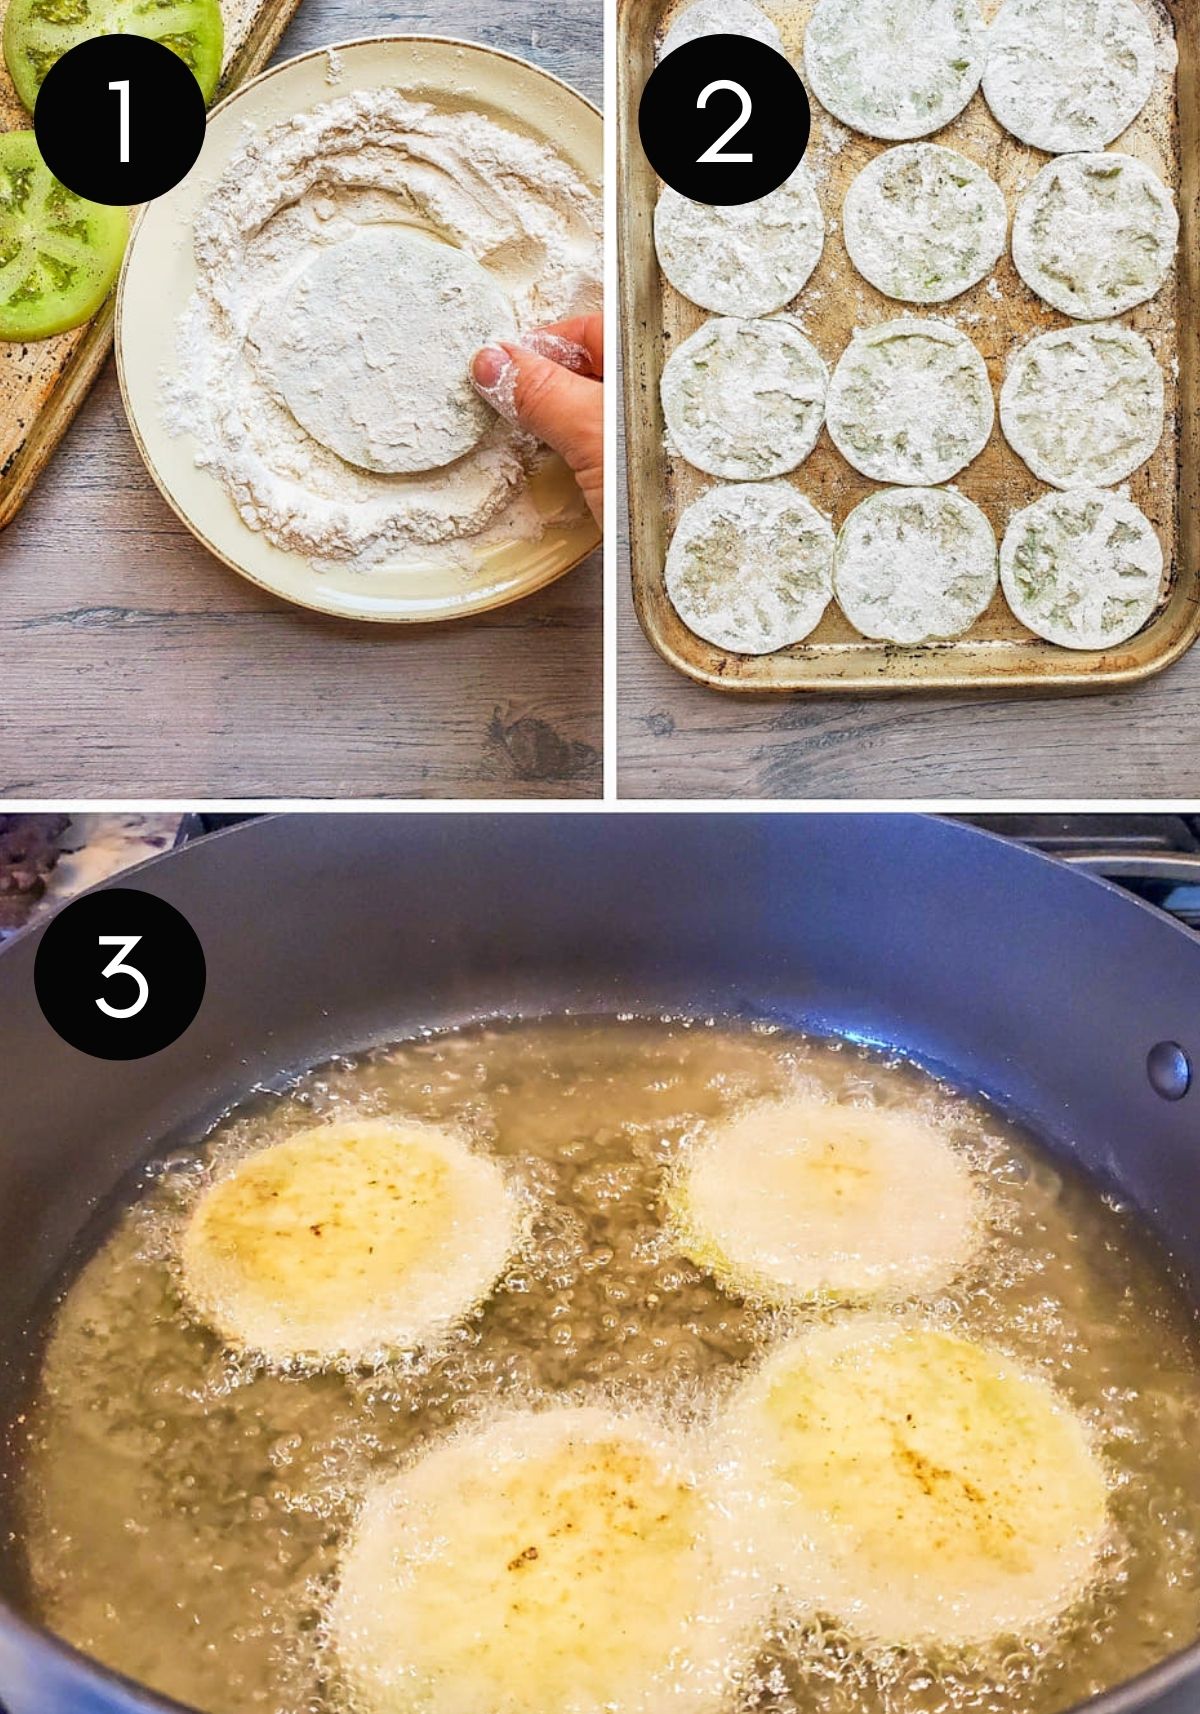 Three prep images of tomatoes being breaded and fried with number overlay.